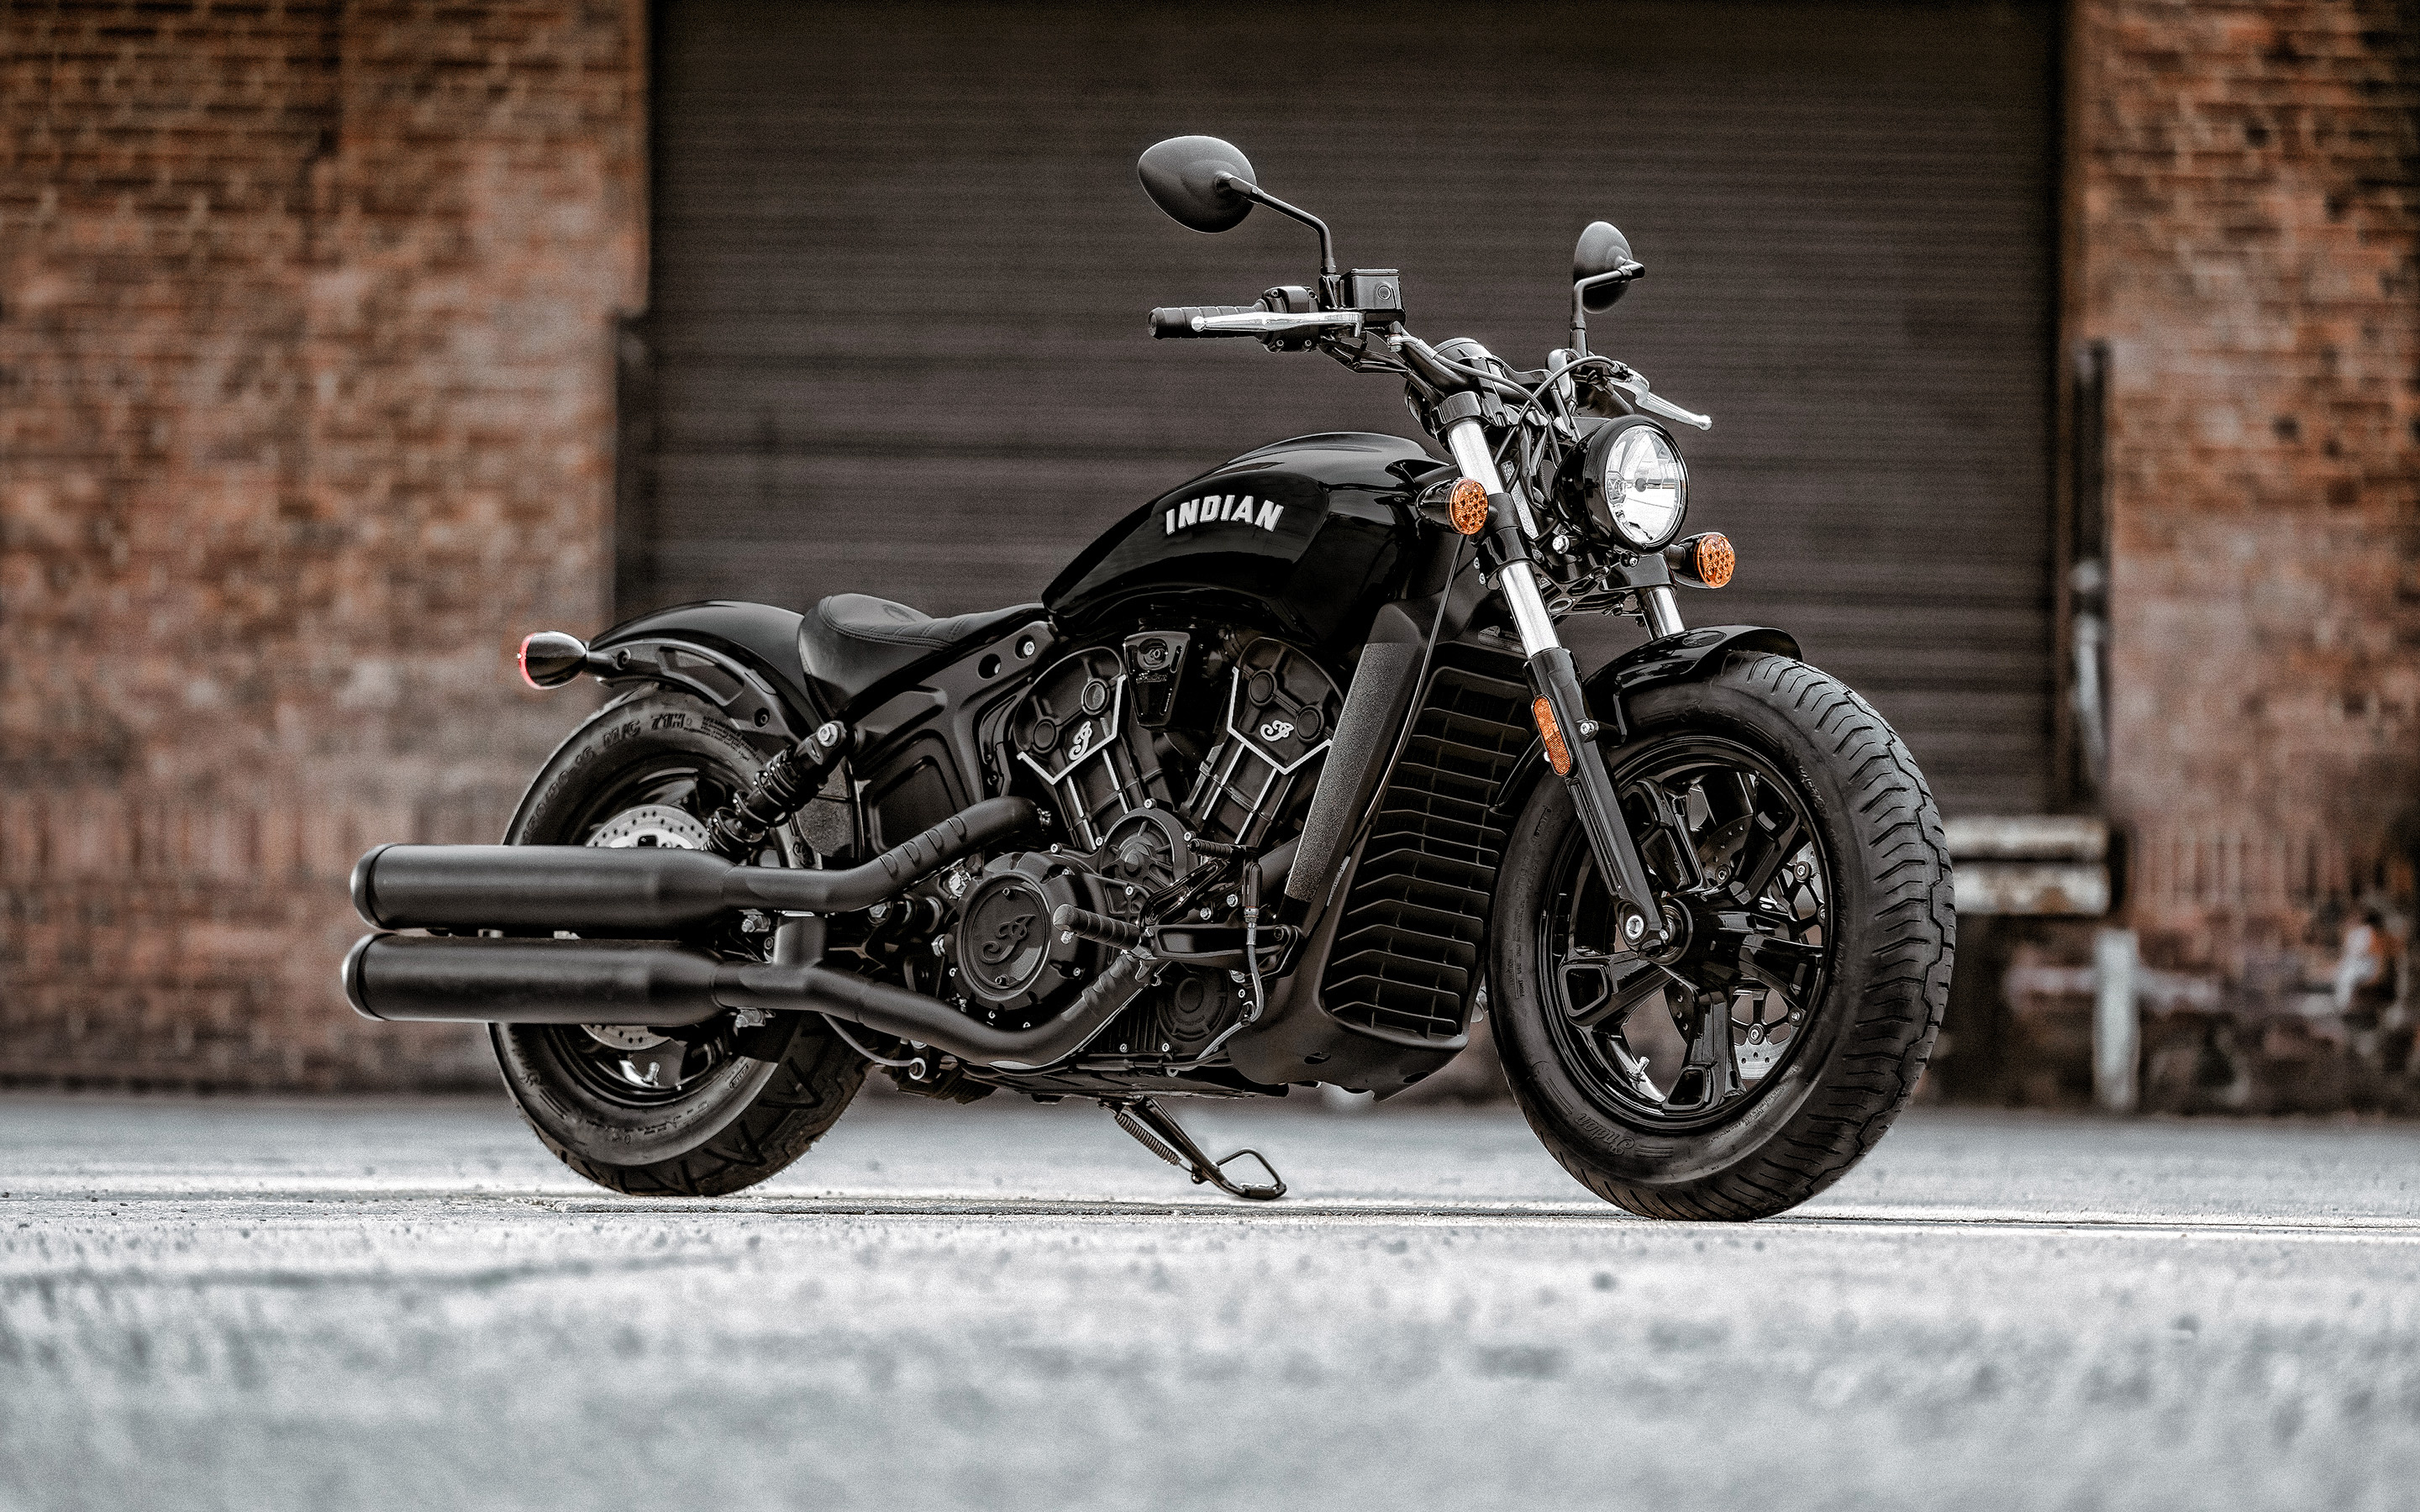 Indian Scout Bobber Sixty, Front view exterior, Black motorcycle, American motorcycles, 2880x1800 HD Desktop